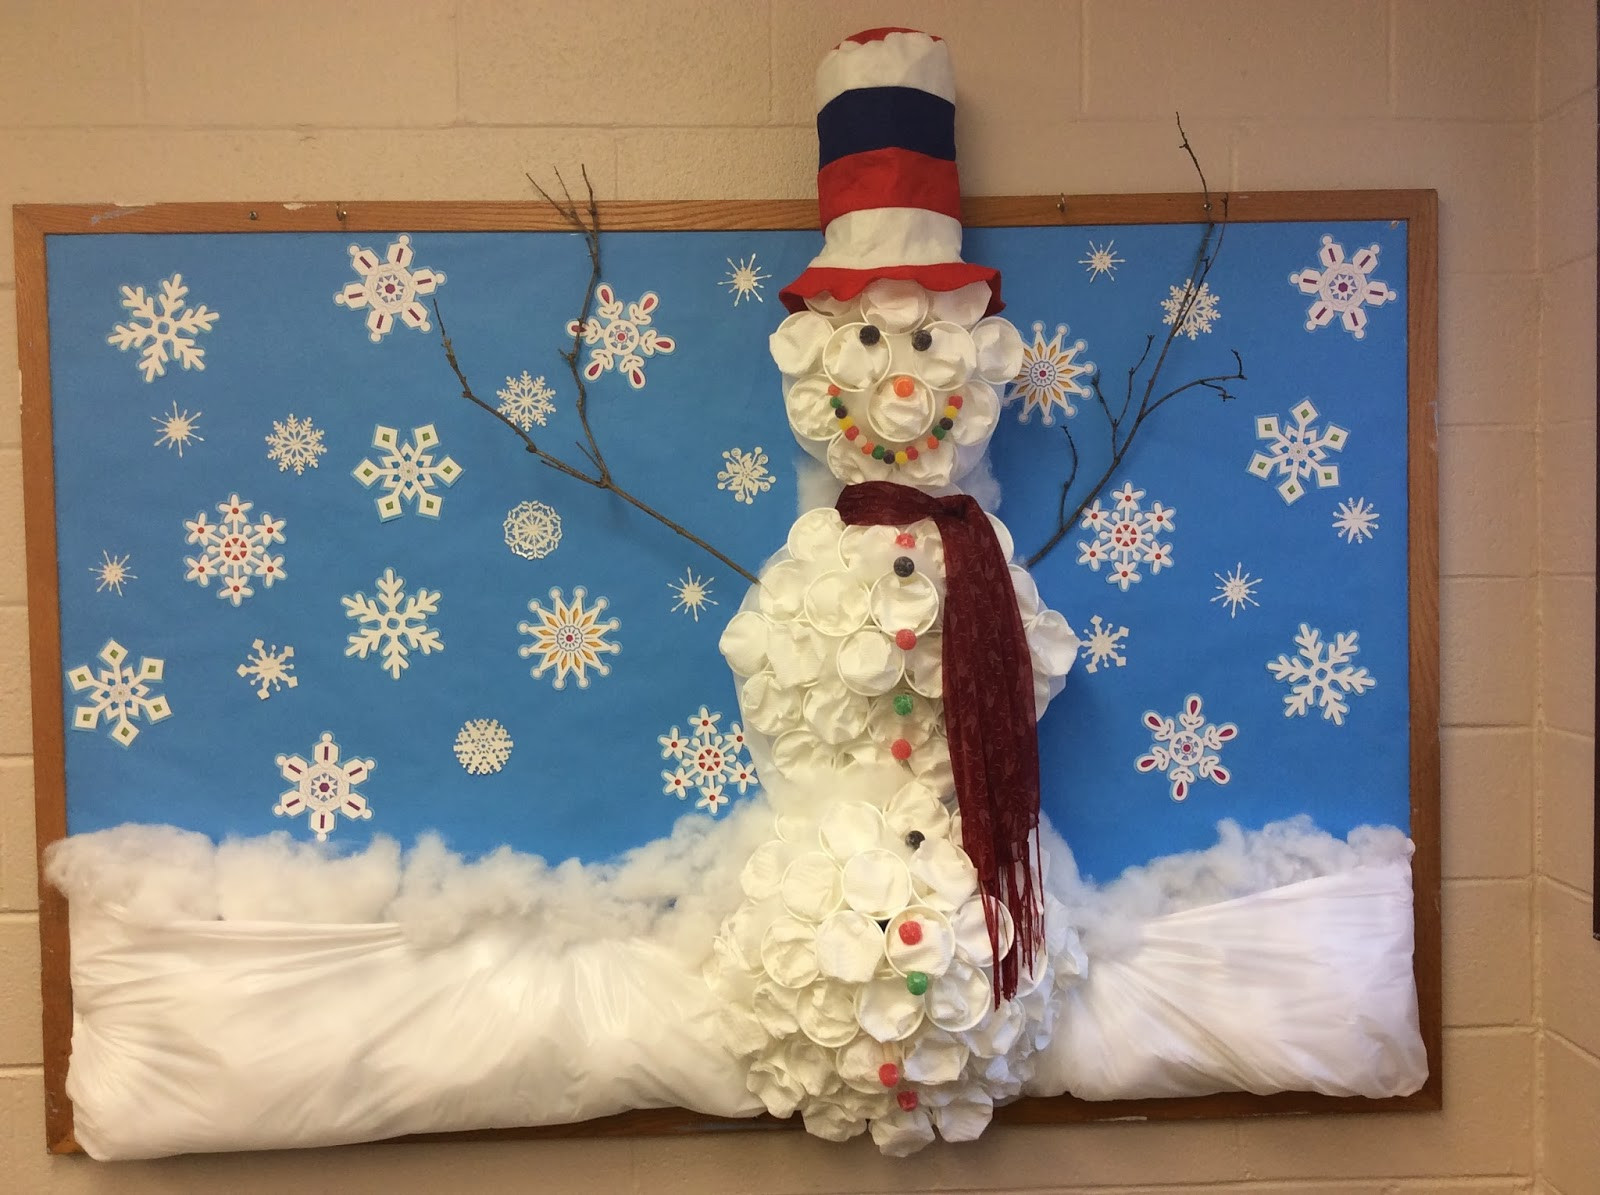 Winter Bulletin Board Ideas Elementary School
 Some of the Best Things in Life are Mistakes Middle